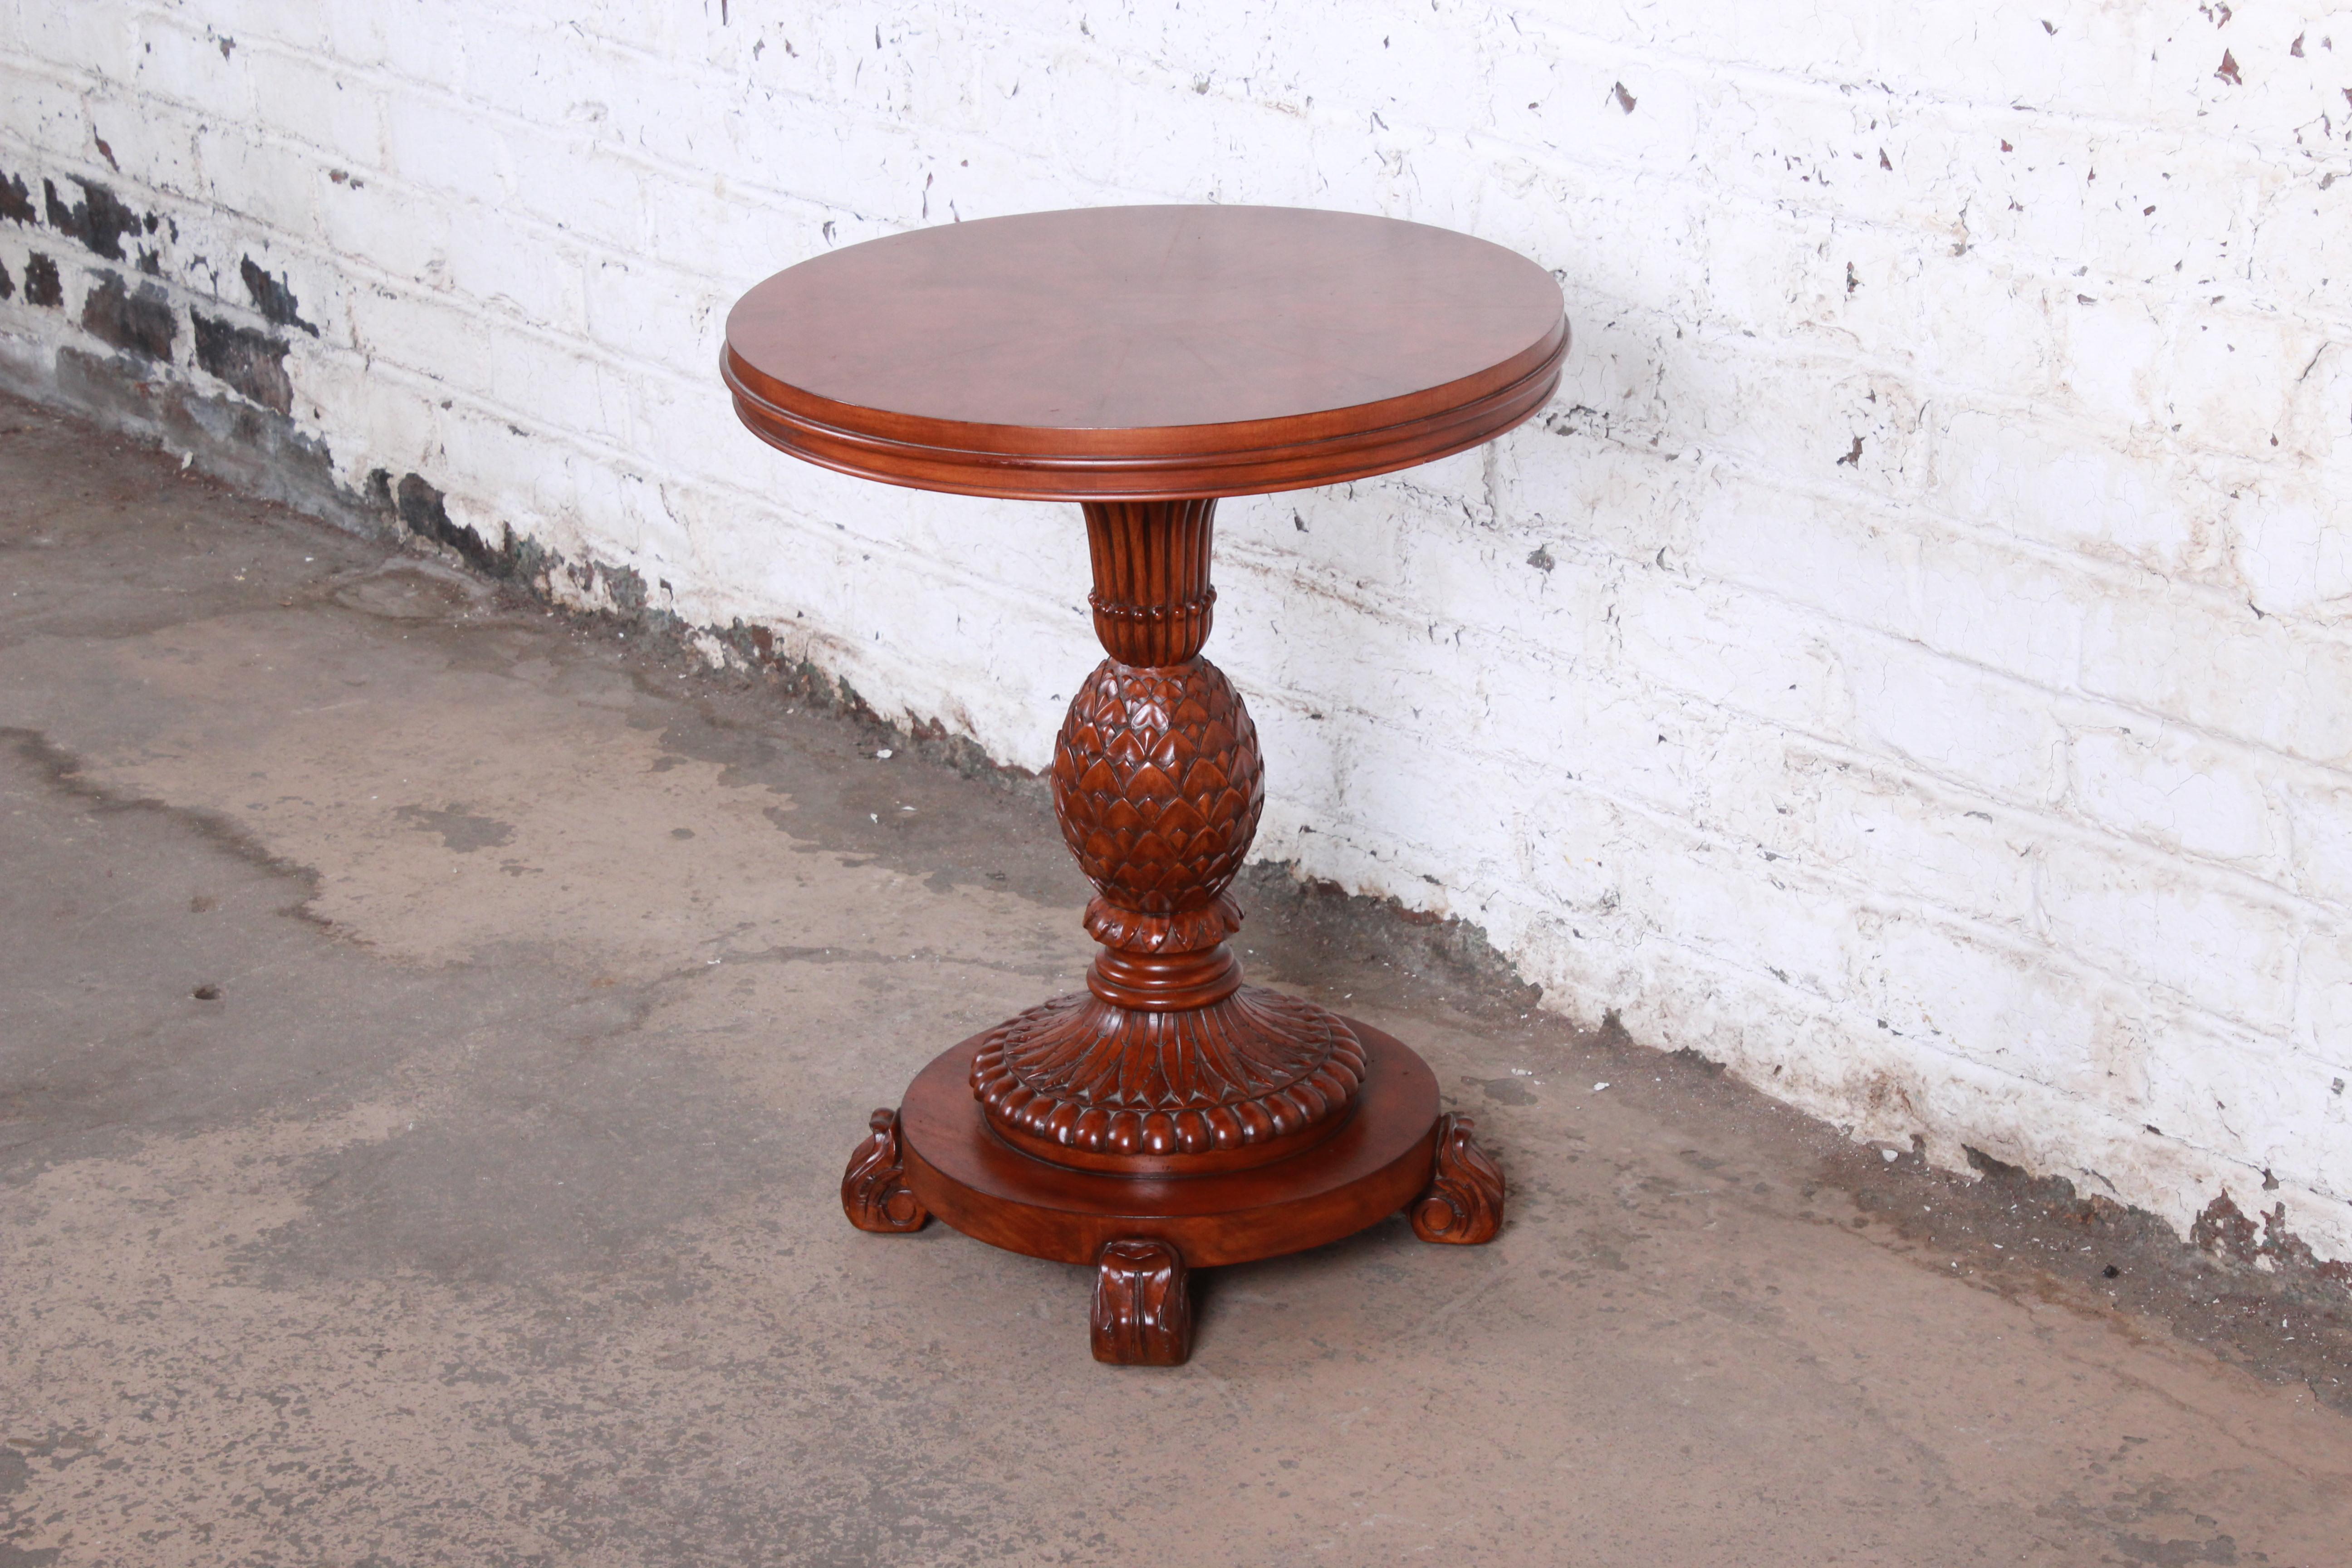 A gorgeous carved mahogany pedestal side table or plant stand by Ethan Allen. The table features beautiful mahogany wood grain with a unique inlaid starburst pattern on top and a beautiful carvings in a pineapple motif. Made with the highest quality